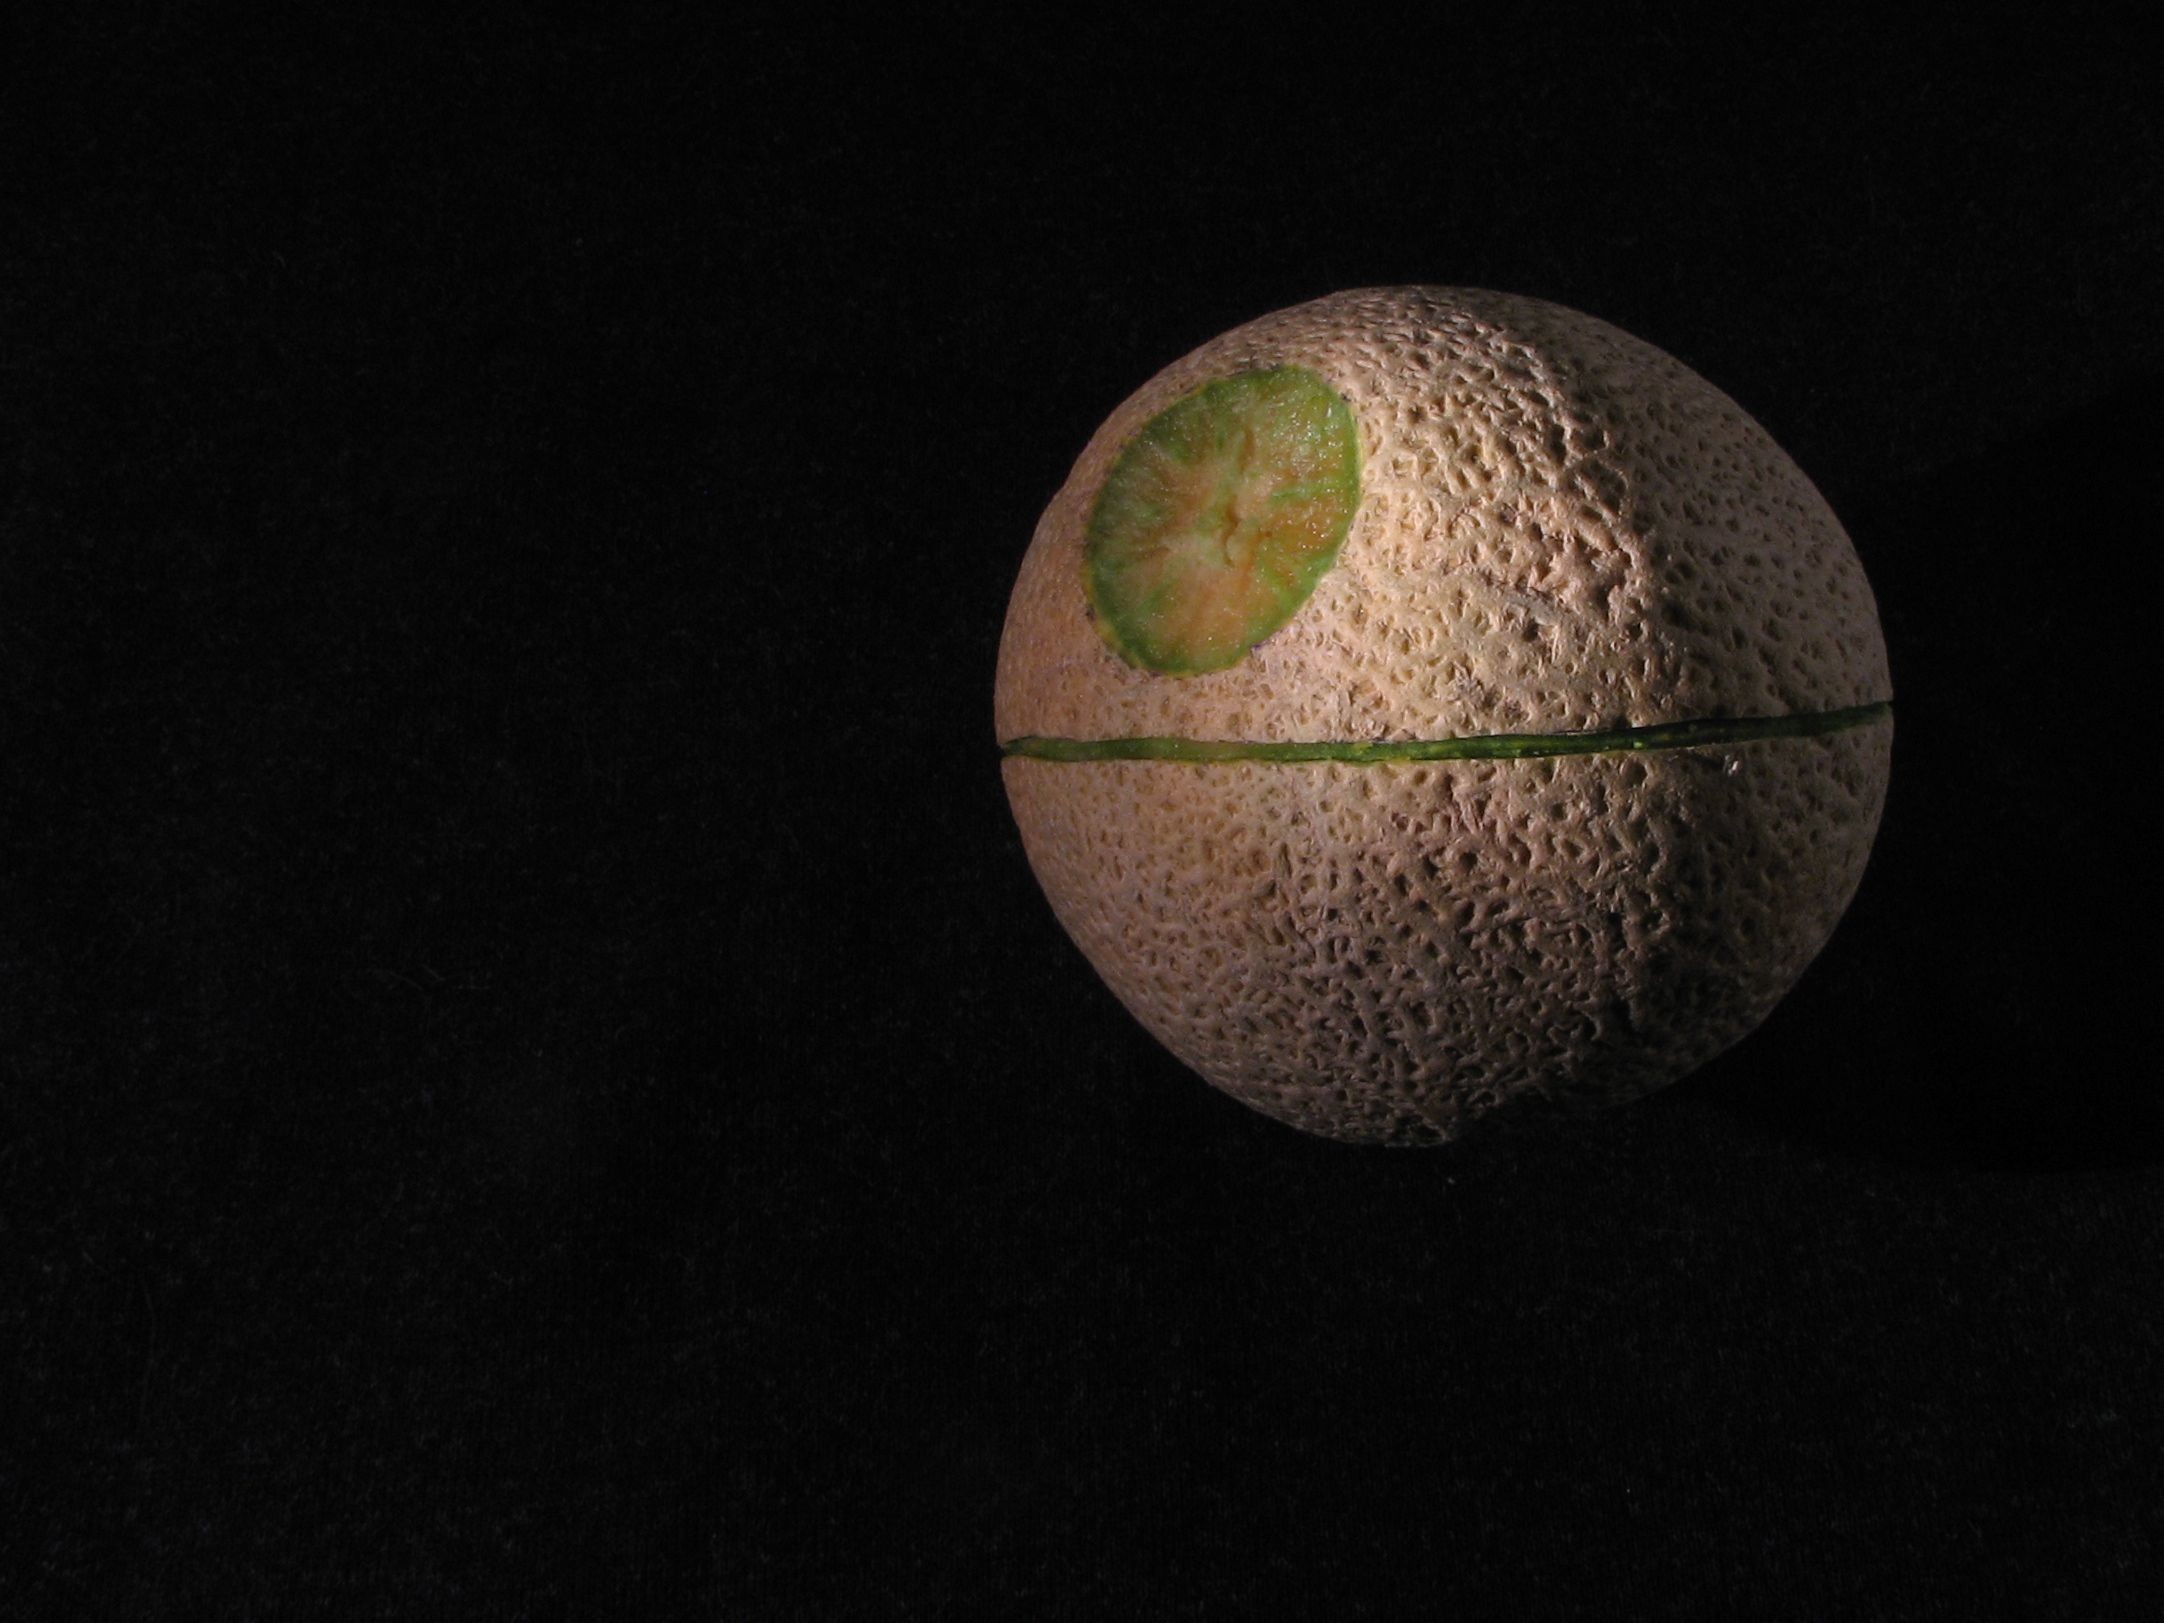 2164x1623 Carved watermelon as Death Star, Windell Oskay (CC BY 2.0)